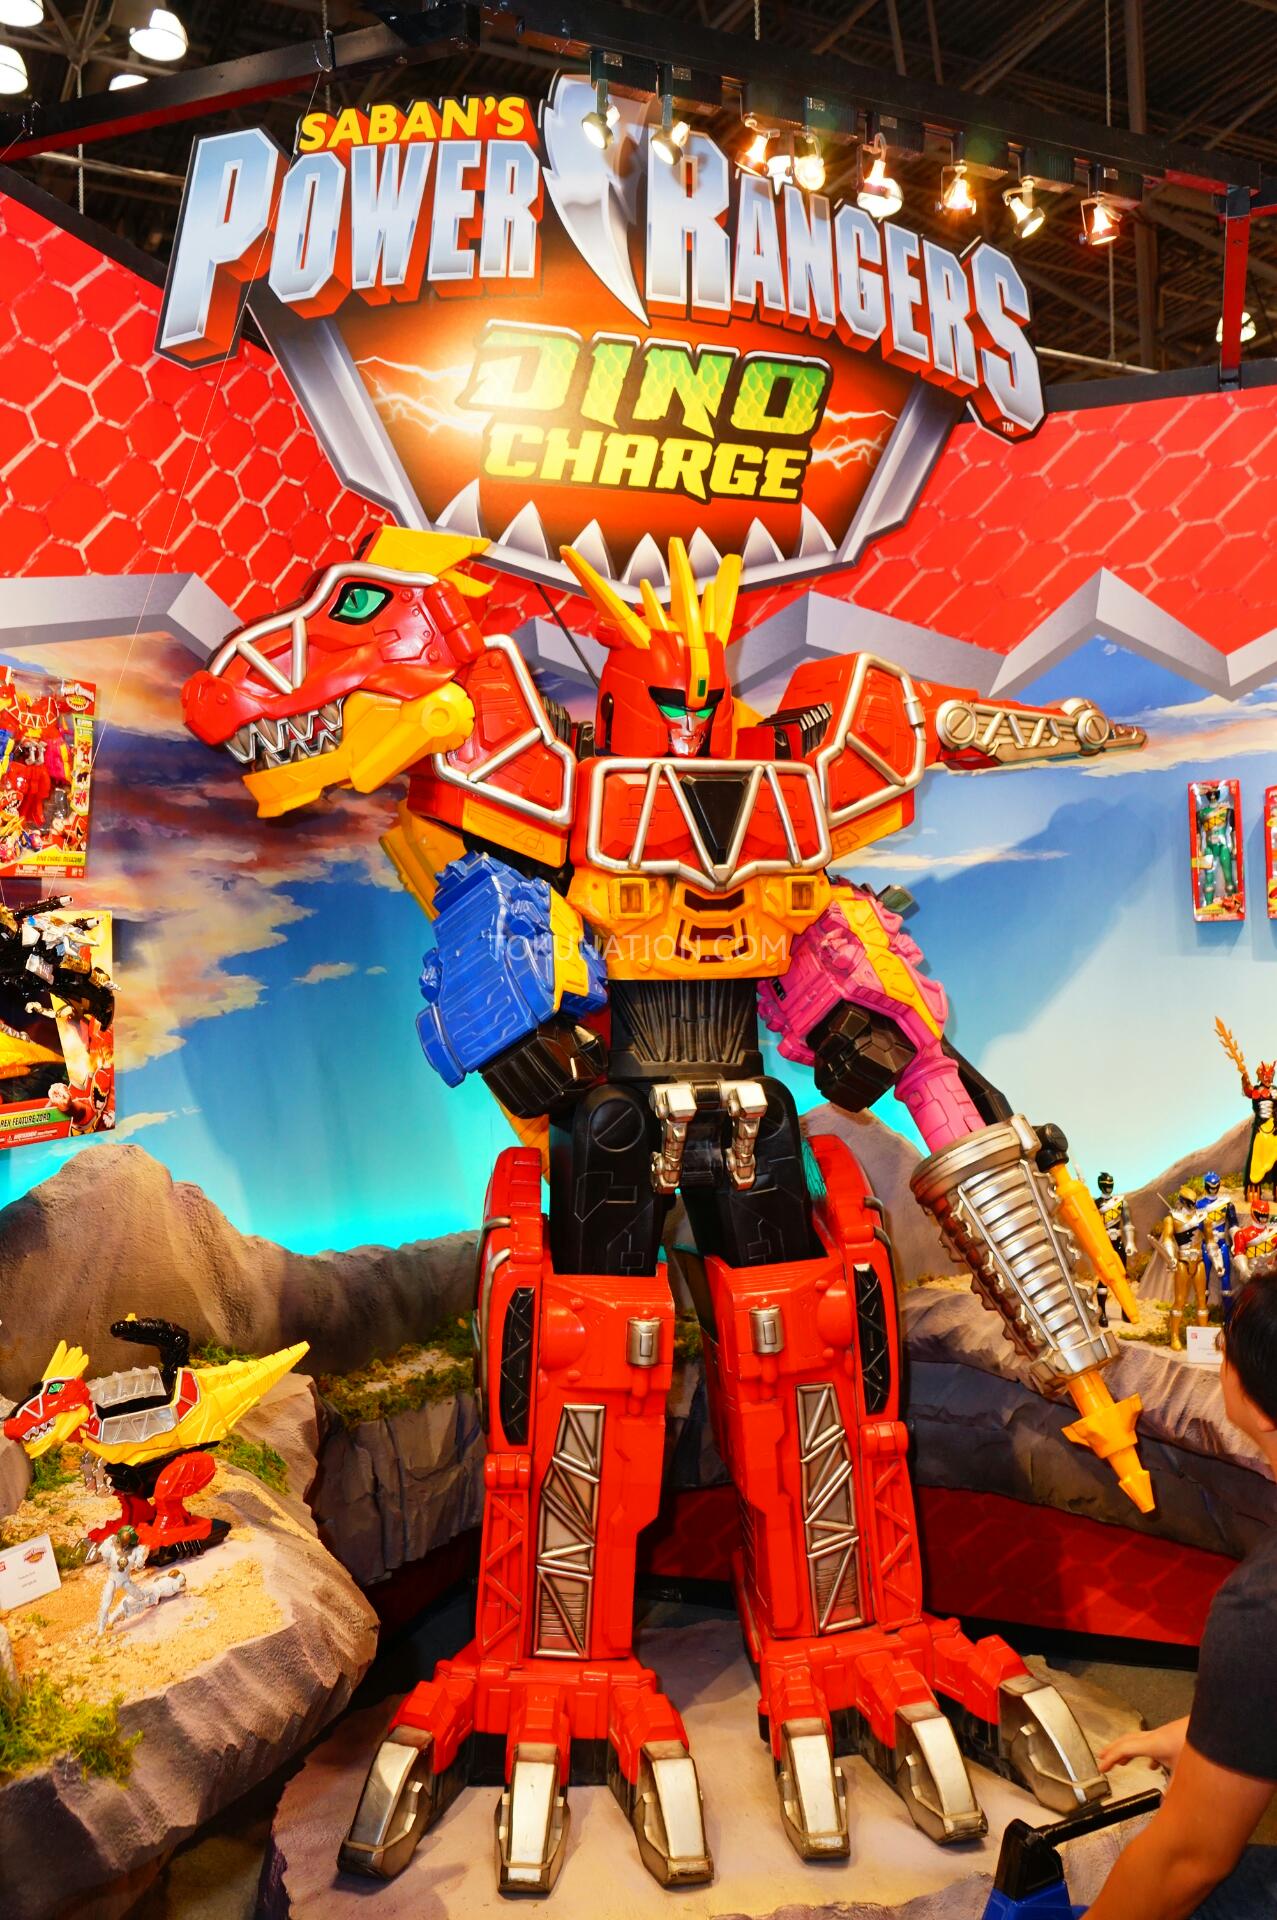 Toy Fair 2015 - Power Rangers Dino Chargers, Zords, and Mix n Morph ...
